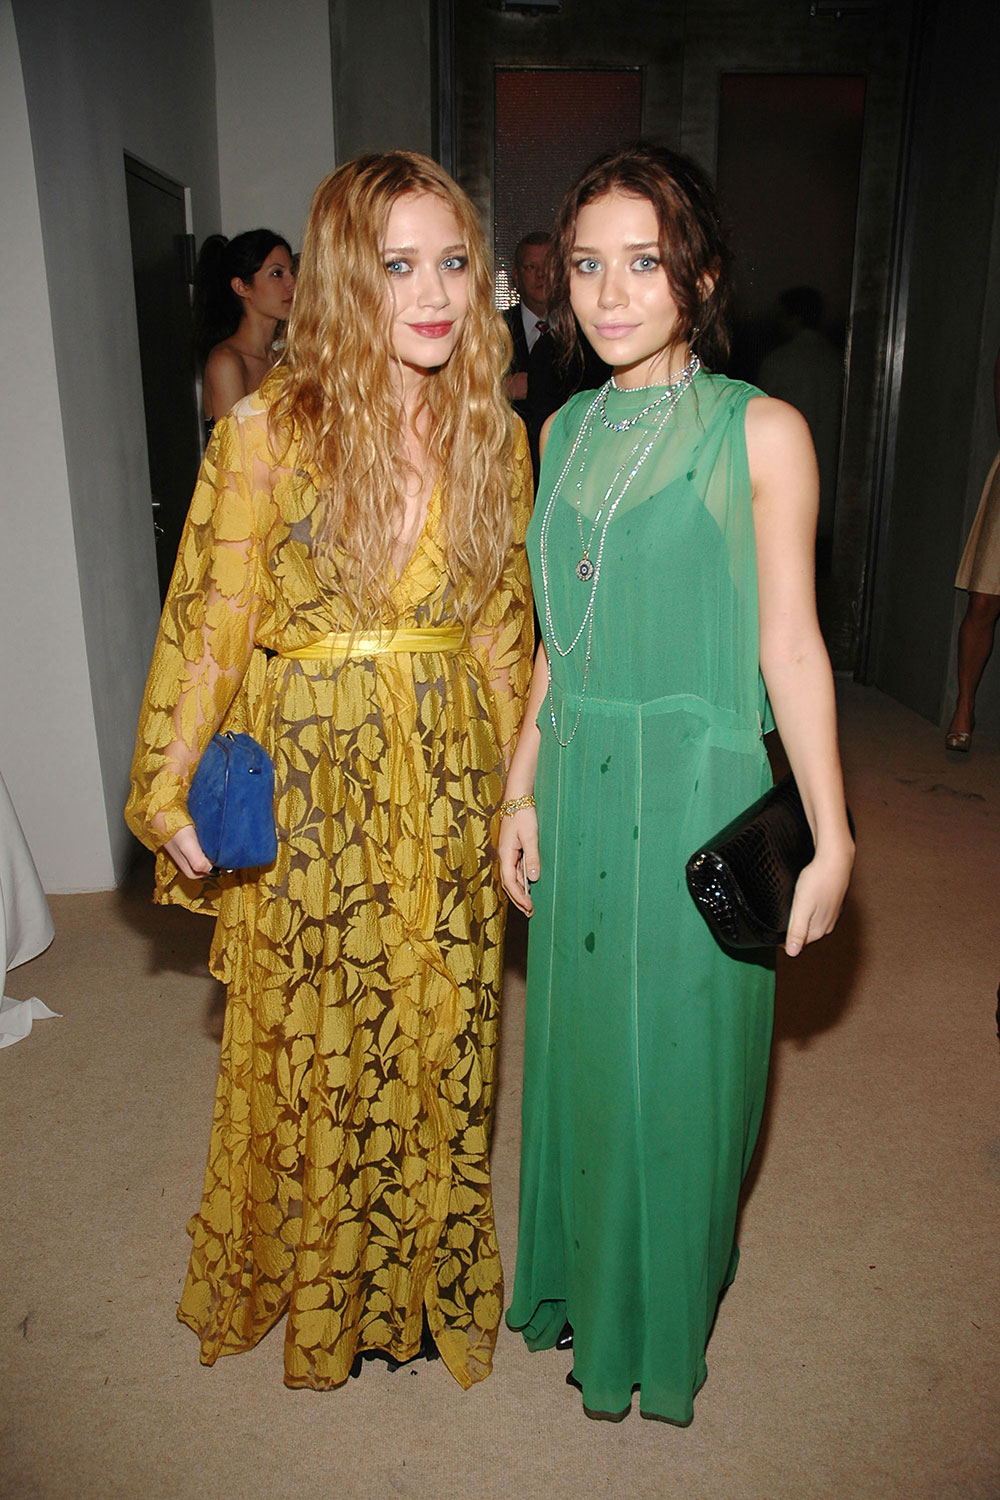 Mary-Kate and Ashley Olsen at the CFDA/Vogue Fashion Fund Awards in 2006